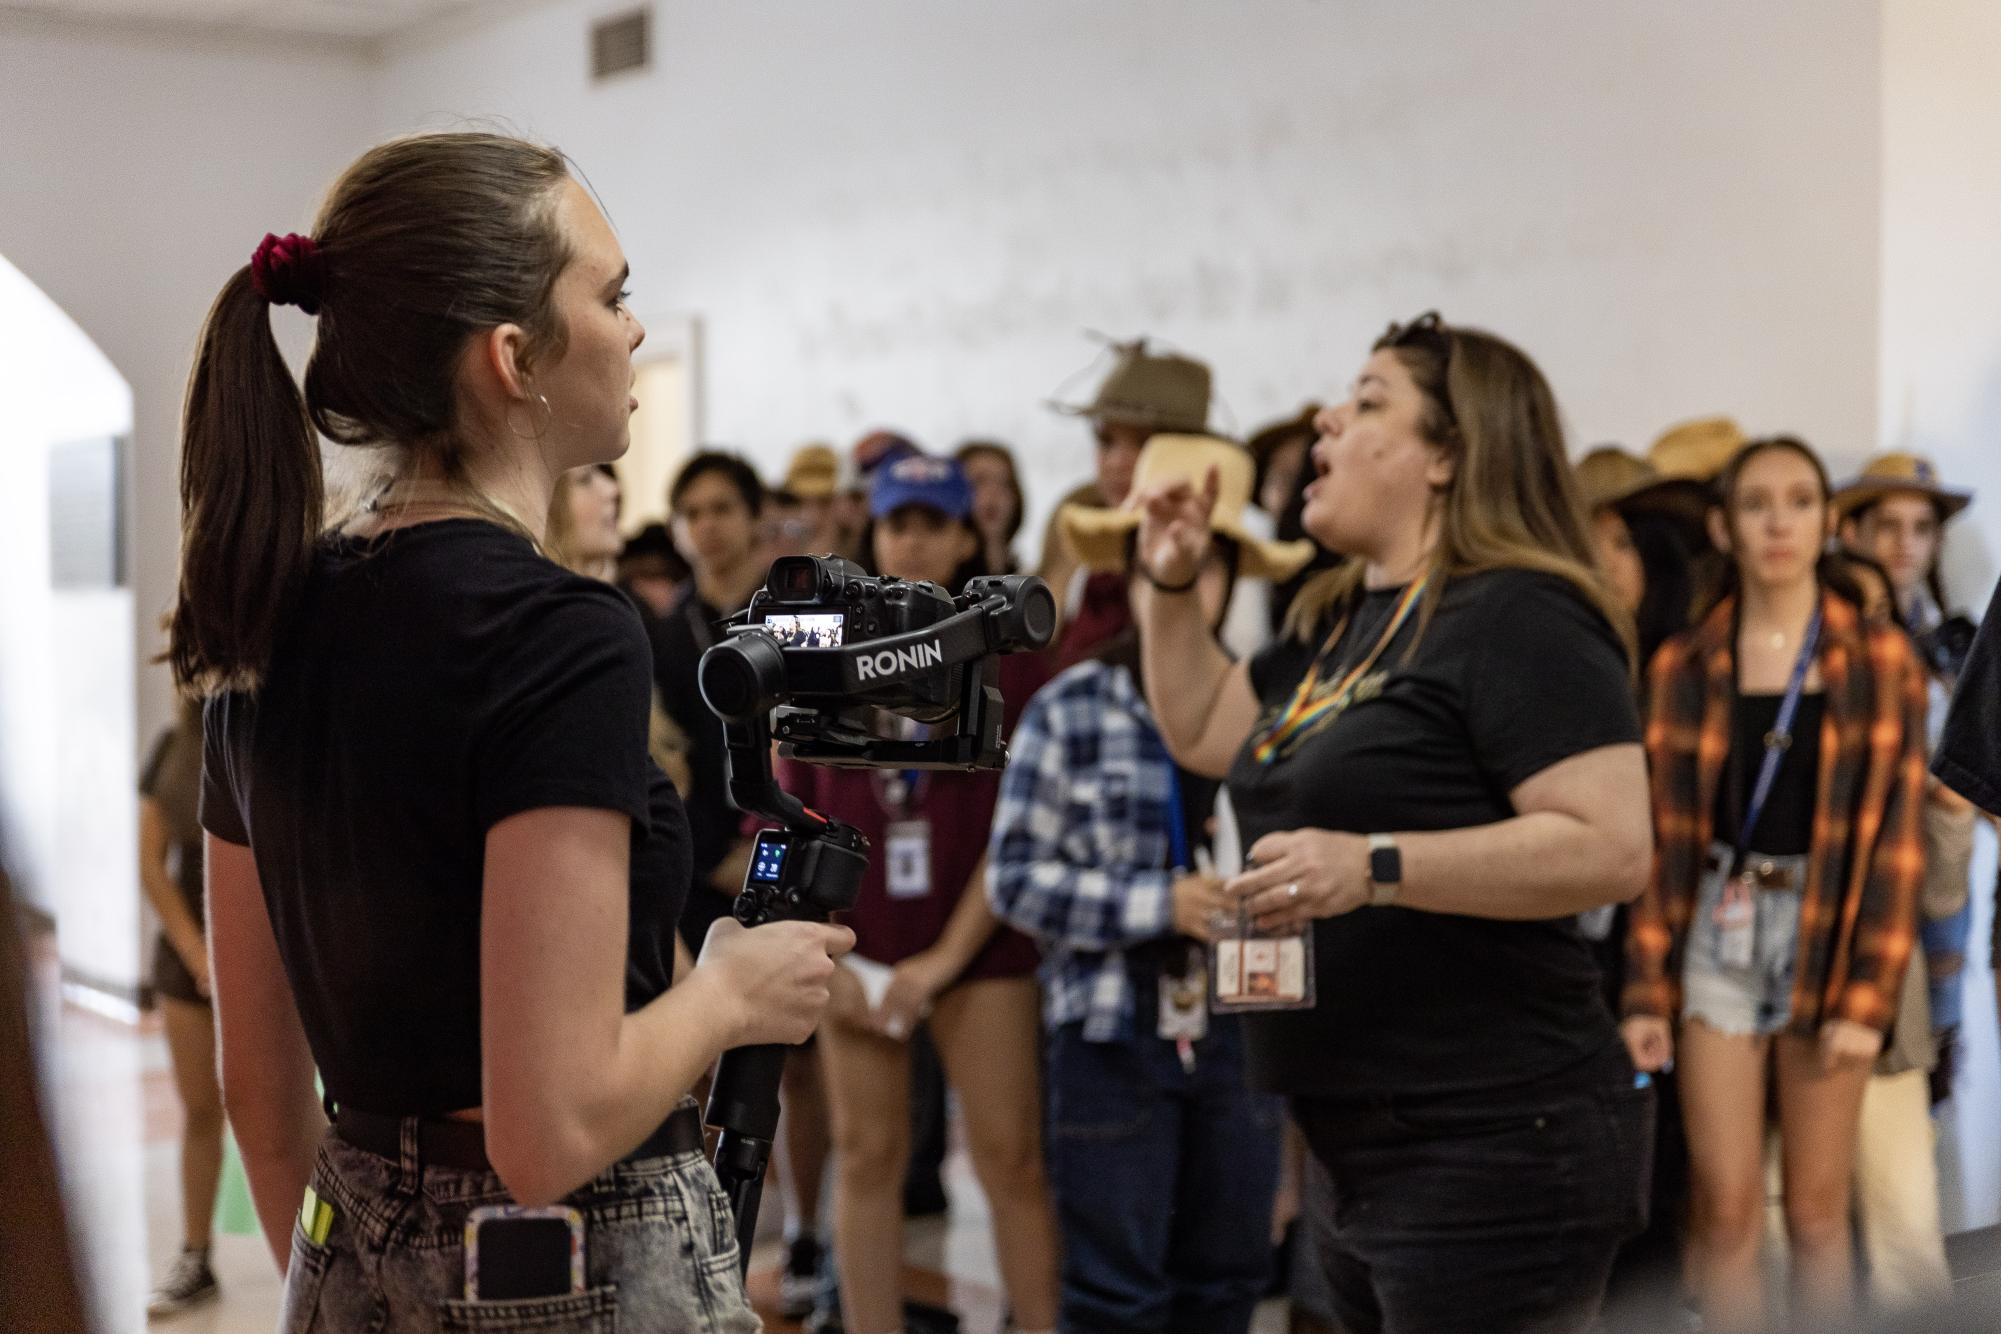 Dreyfoos alumnus Lexi Critchett gives orders to a group of communications students during one of the multiple filmings of the 2022-2023 school year lip dub. To streamline the process, the filming of the lip dub is being shot in intervals at special school occasions throughout 2023 and 2024.
